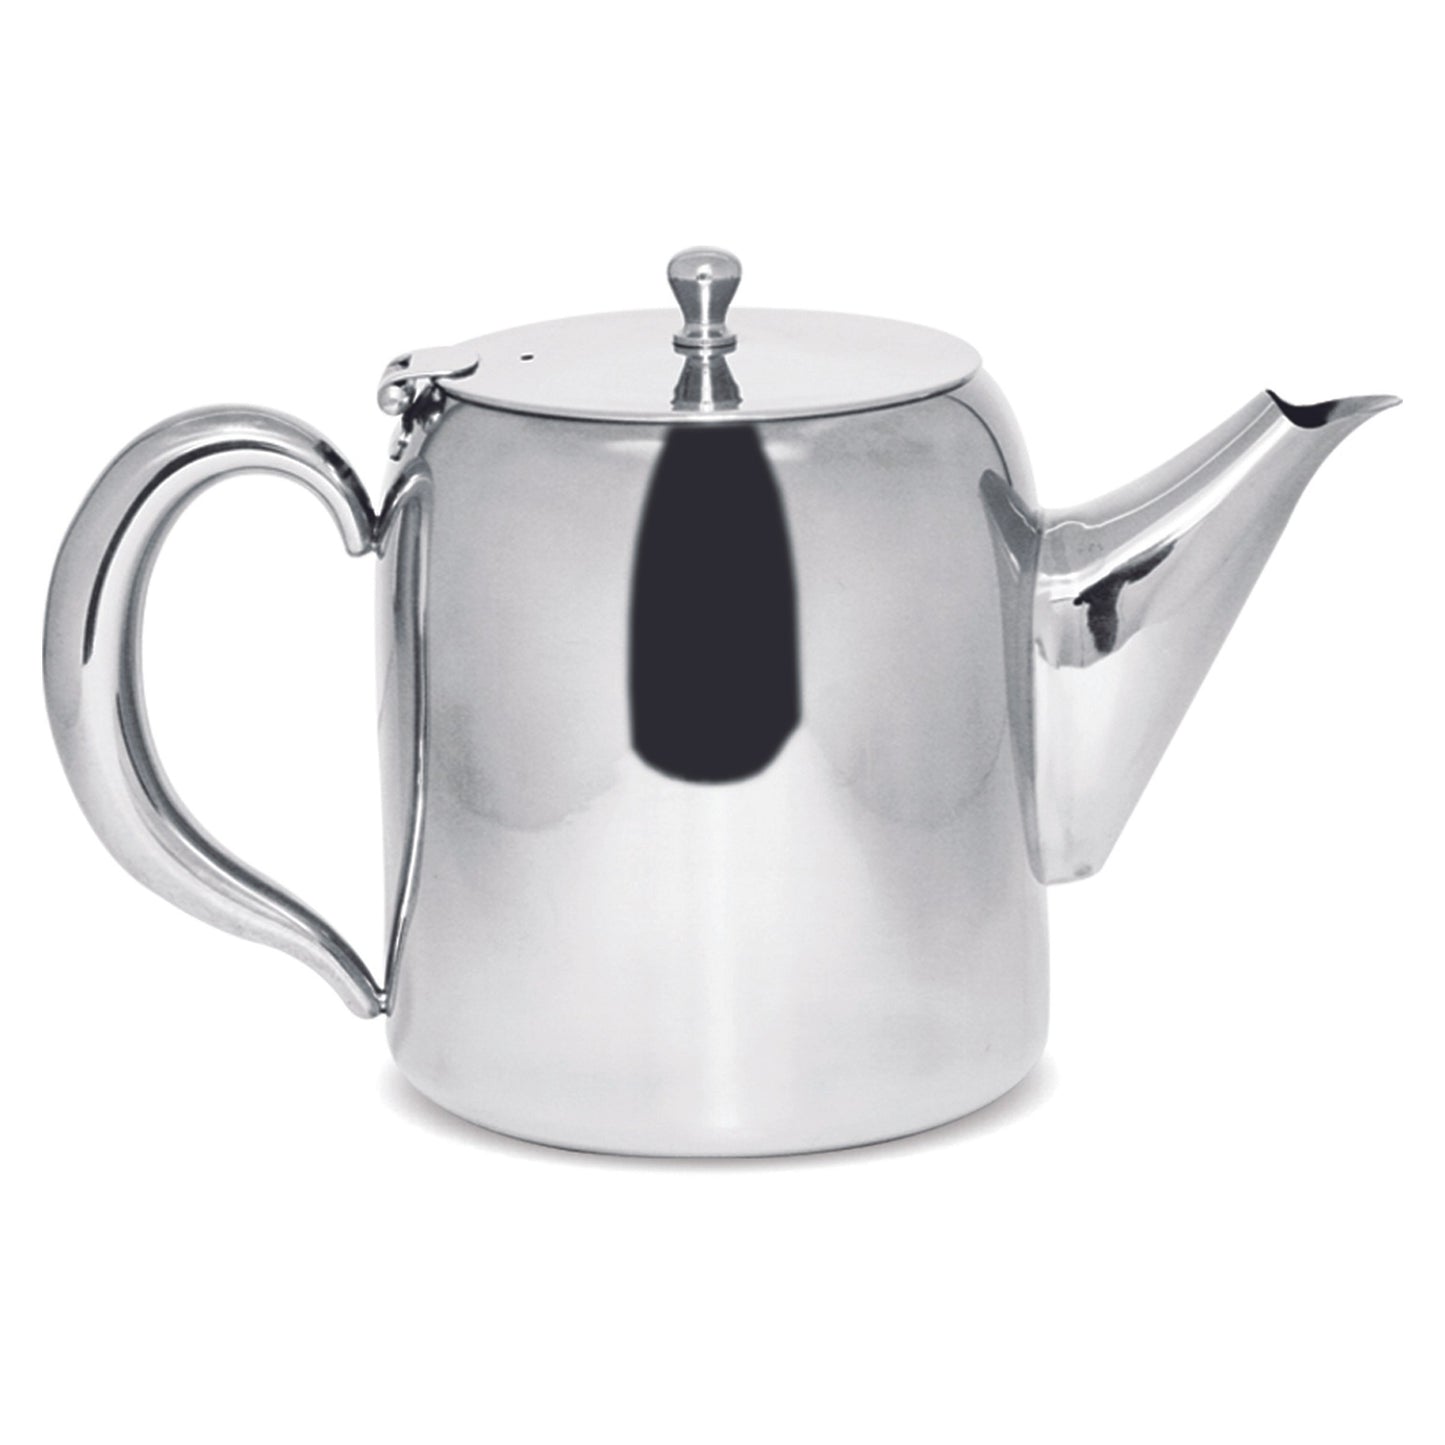 Classic Stainless Steel Teapot 1900ml Concierge Collection